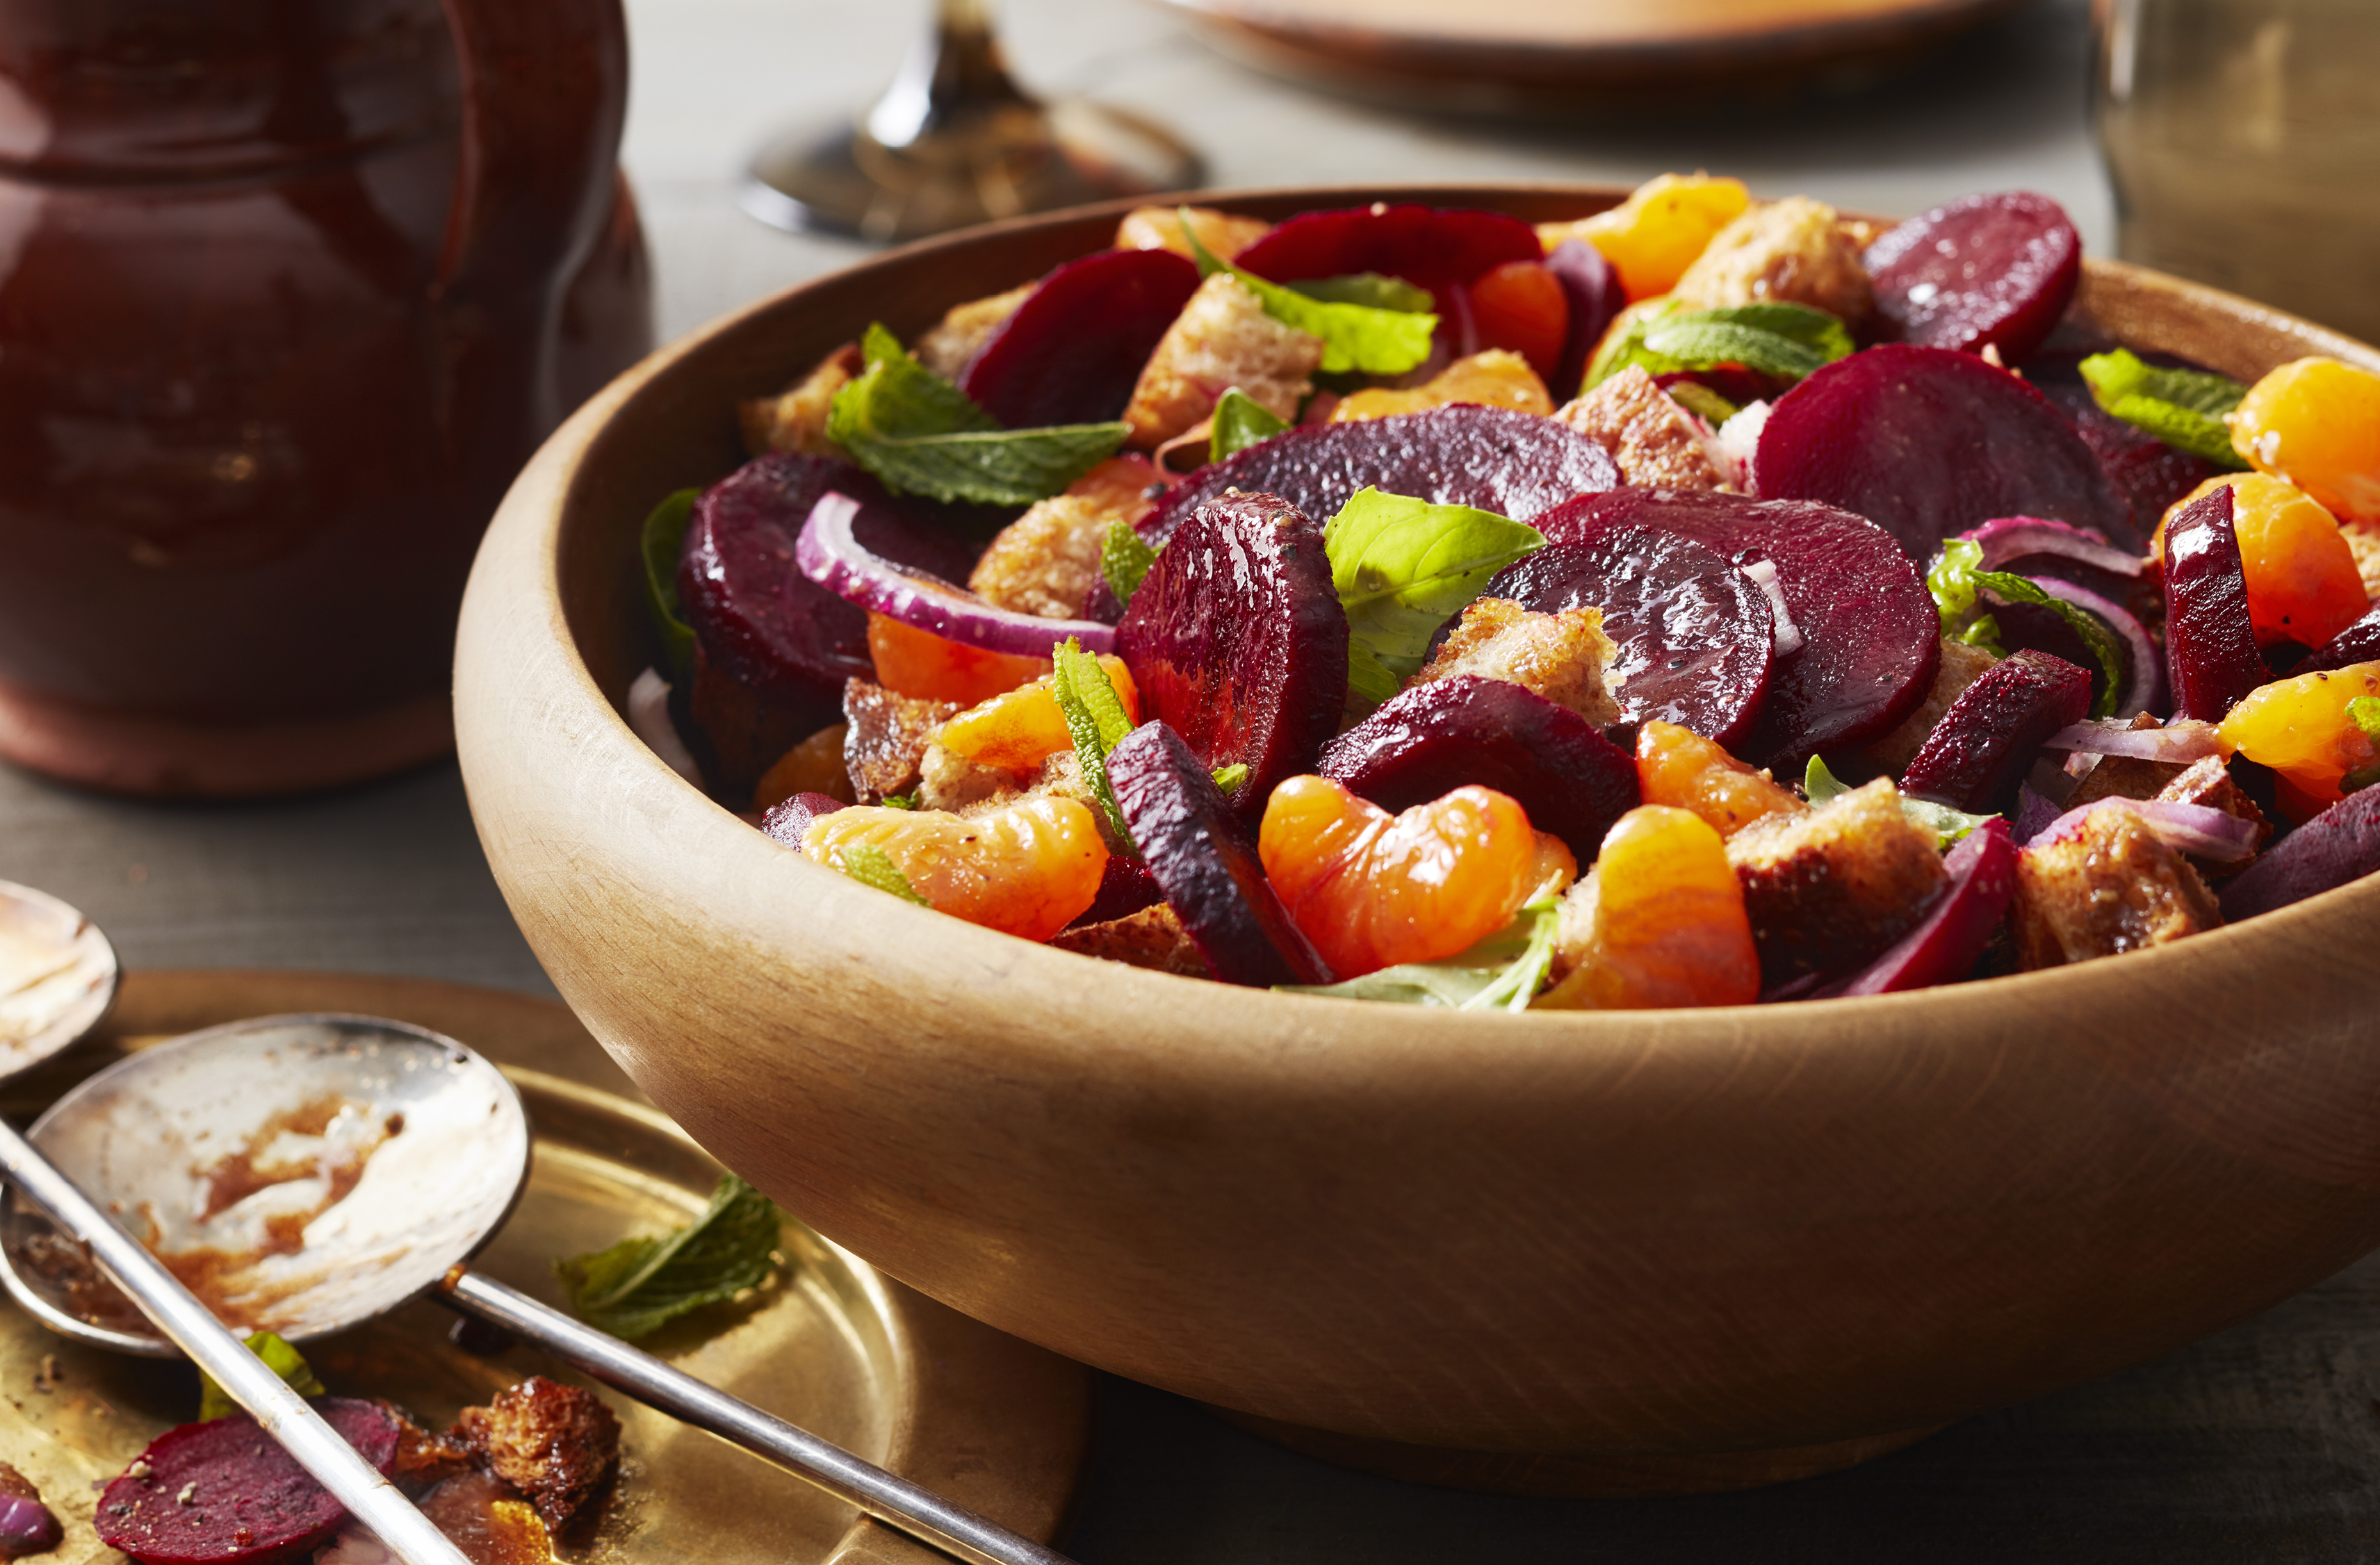 Beet salad with mandarin orange segments and herbs in a wooden bowl
